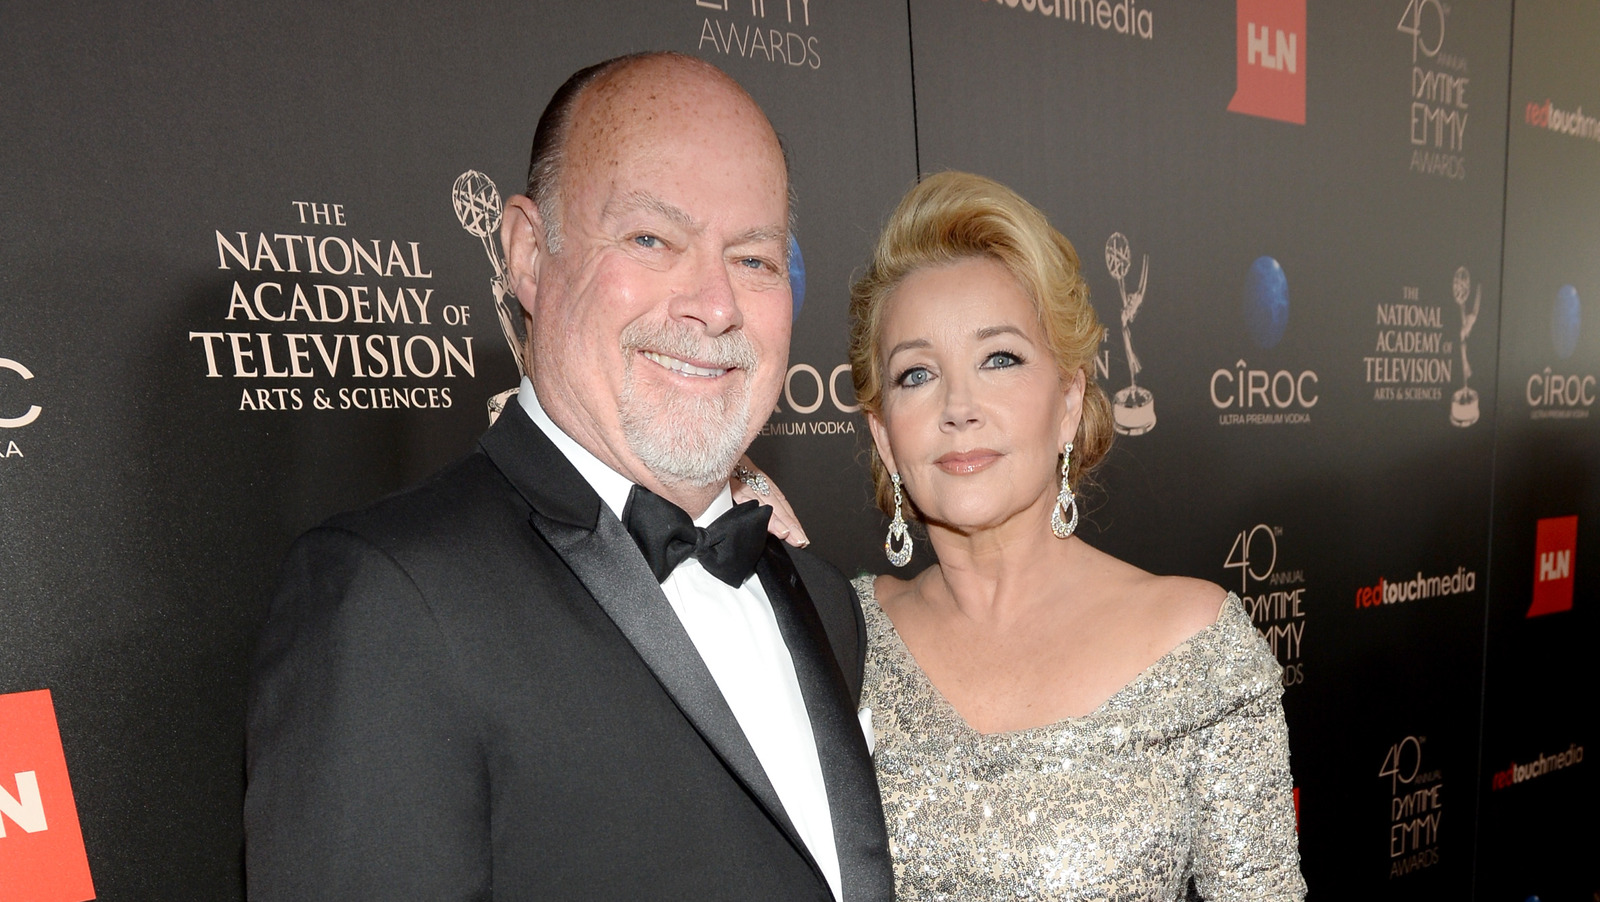 Meet The Young And The Restless Star Melody Thomas Scott's Husband, Ed